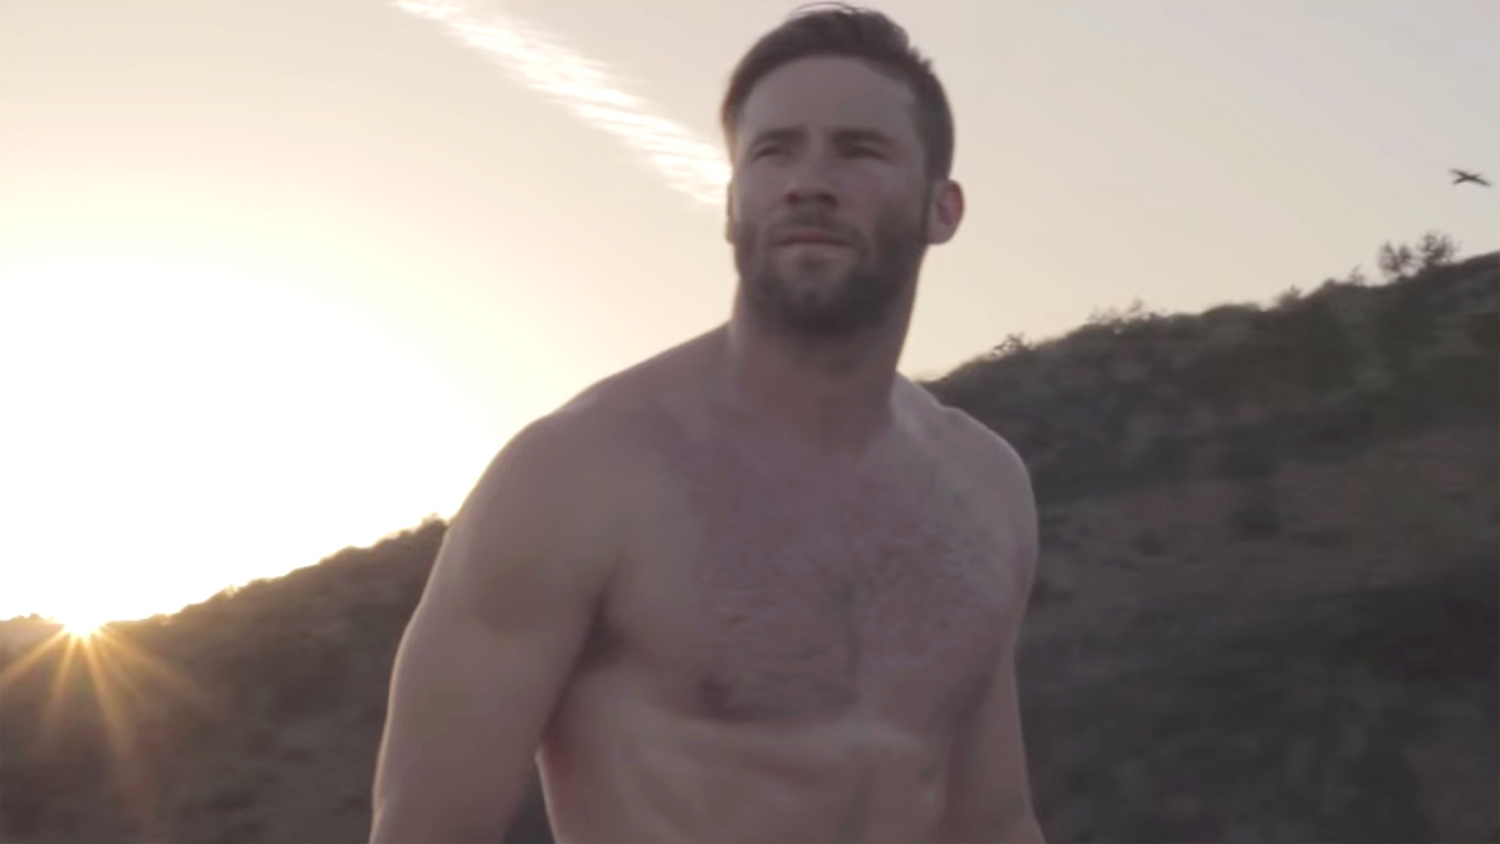 Julian Edelman shows off his hot muscular body while going shirtless at the...